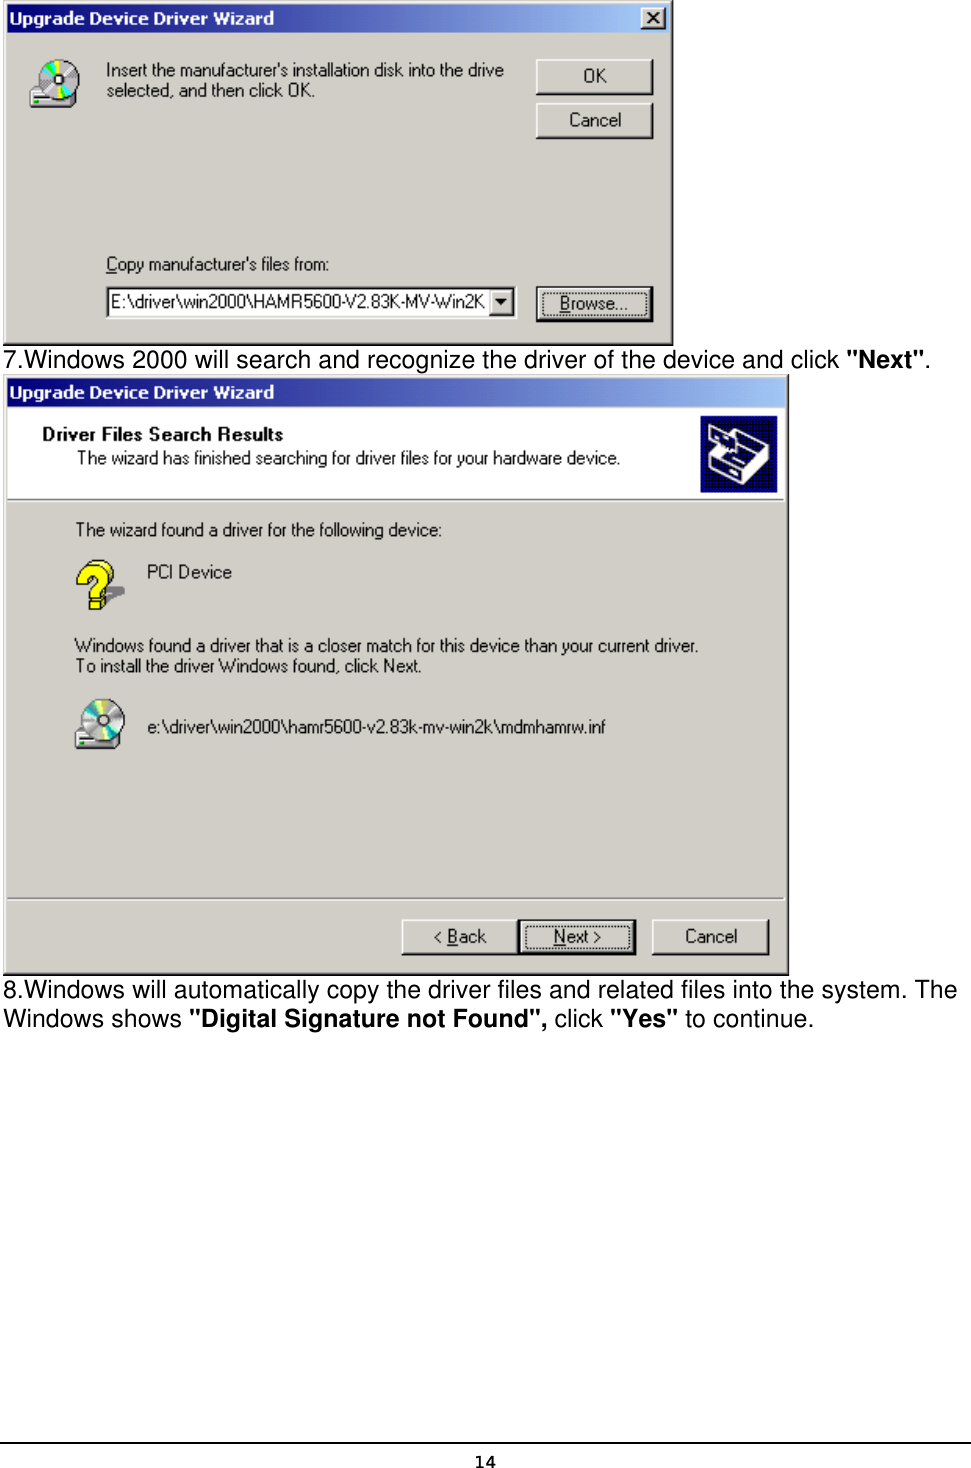   14 7.Windows 2000 will search and recognize the driver of the device and click &quot;Next&quot;.  8.Windows will automatically copy the driver files and related files into the system. The Windows shows &quot;Digital Signature not Found&quot;, click &quot;Yes&quot; to continue. 